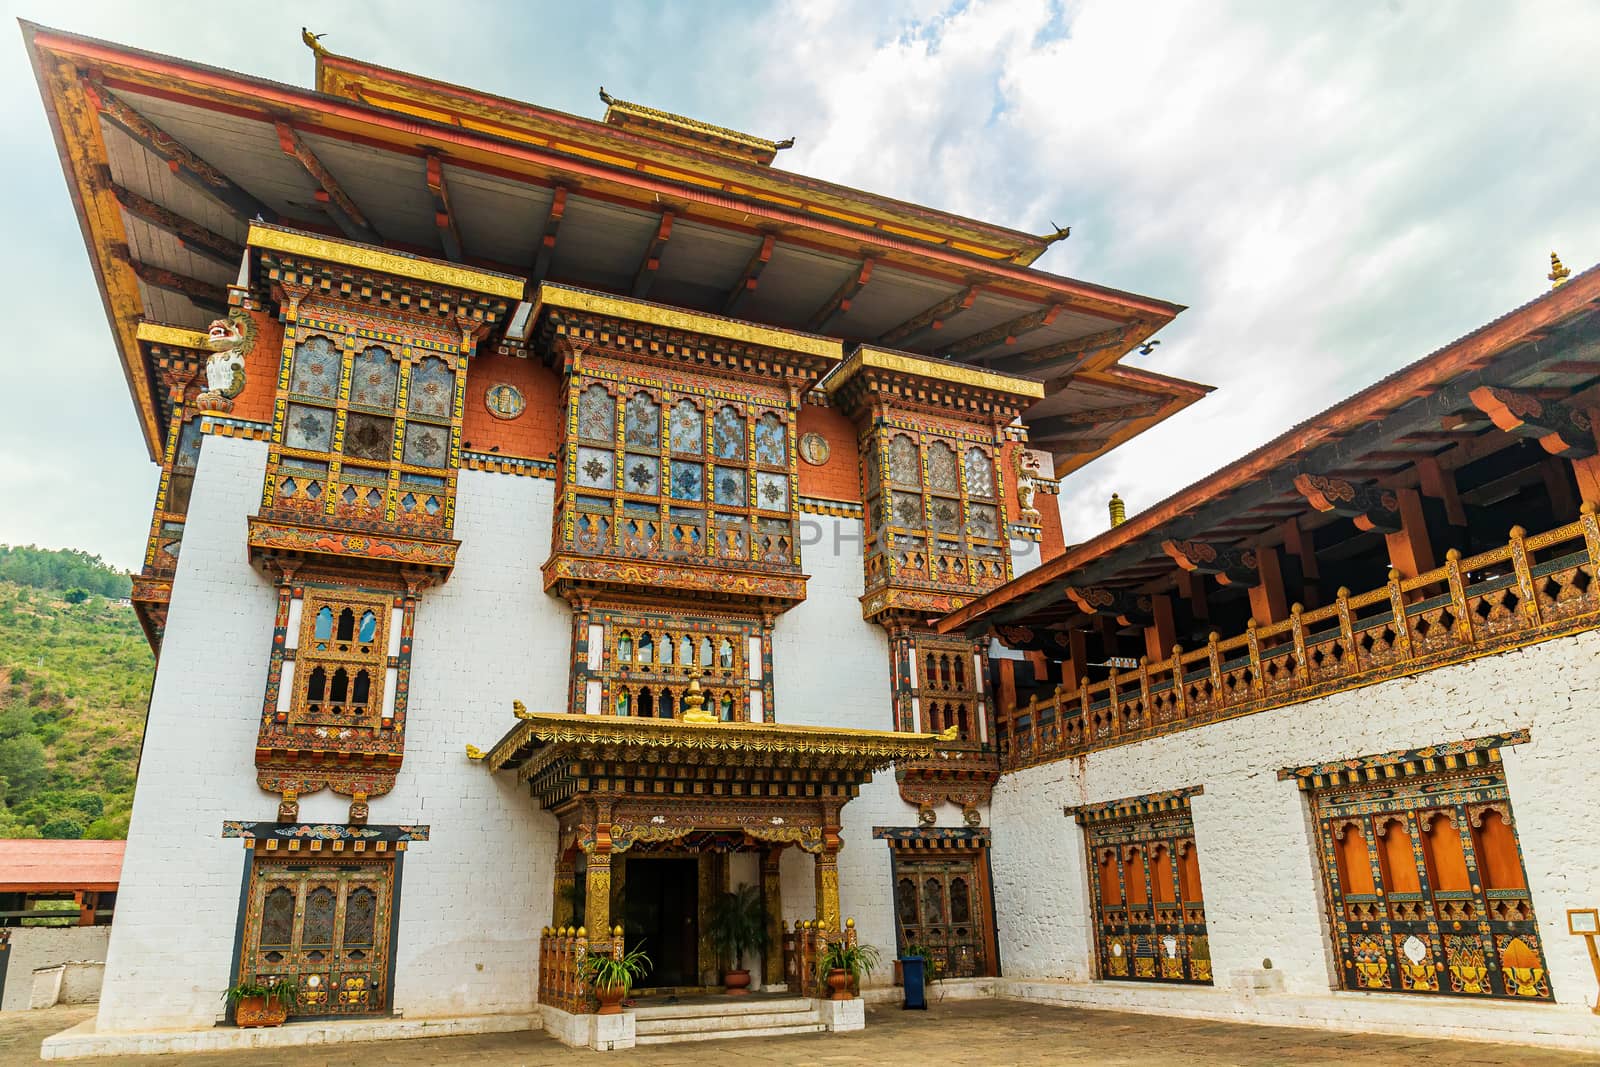 Inner building of the Punakha Dzong holding the Ranjung Karsapani by COffe